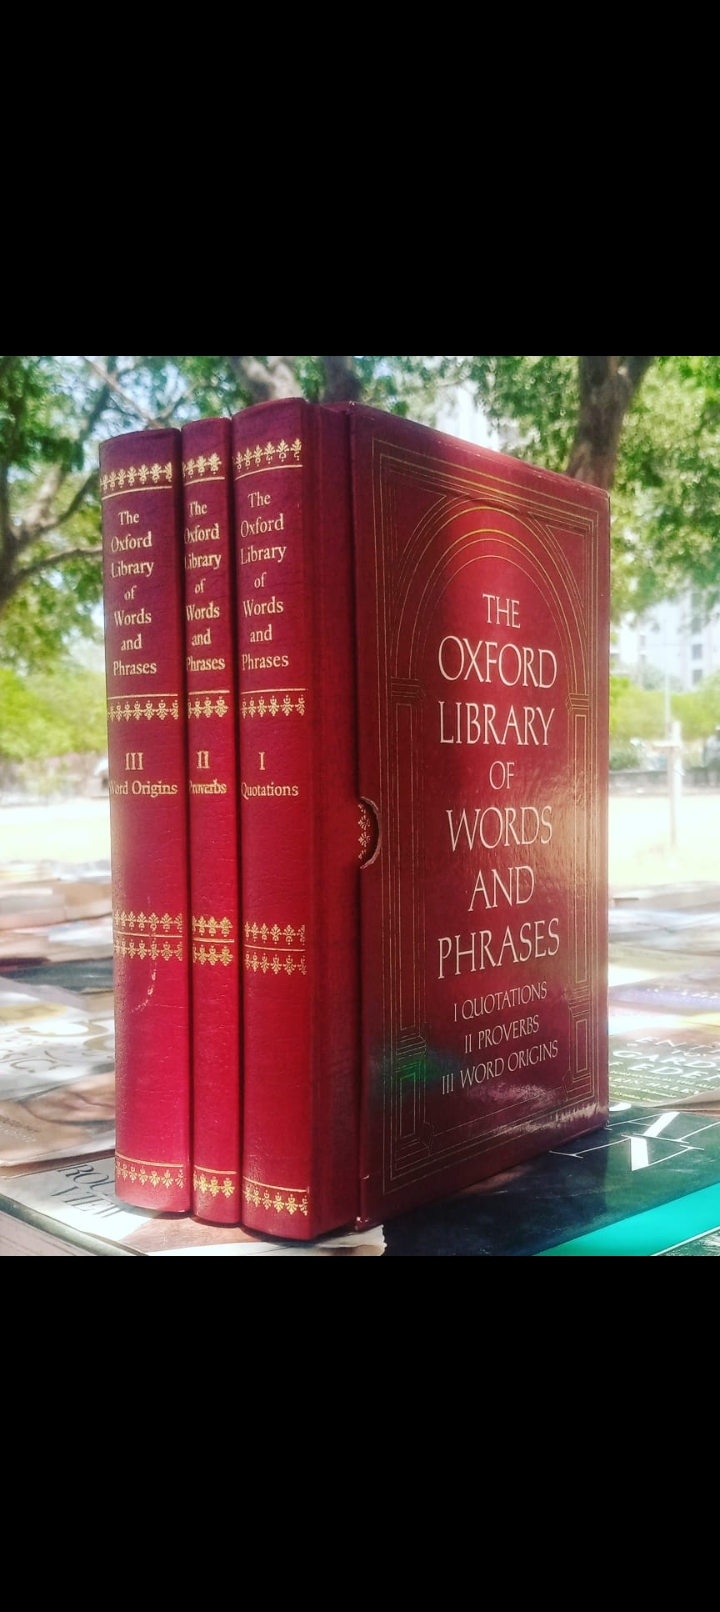 the oxford library of words and phrases. quotations, proverbs and word origins. 3 volume set leather